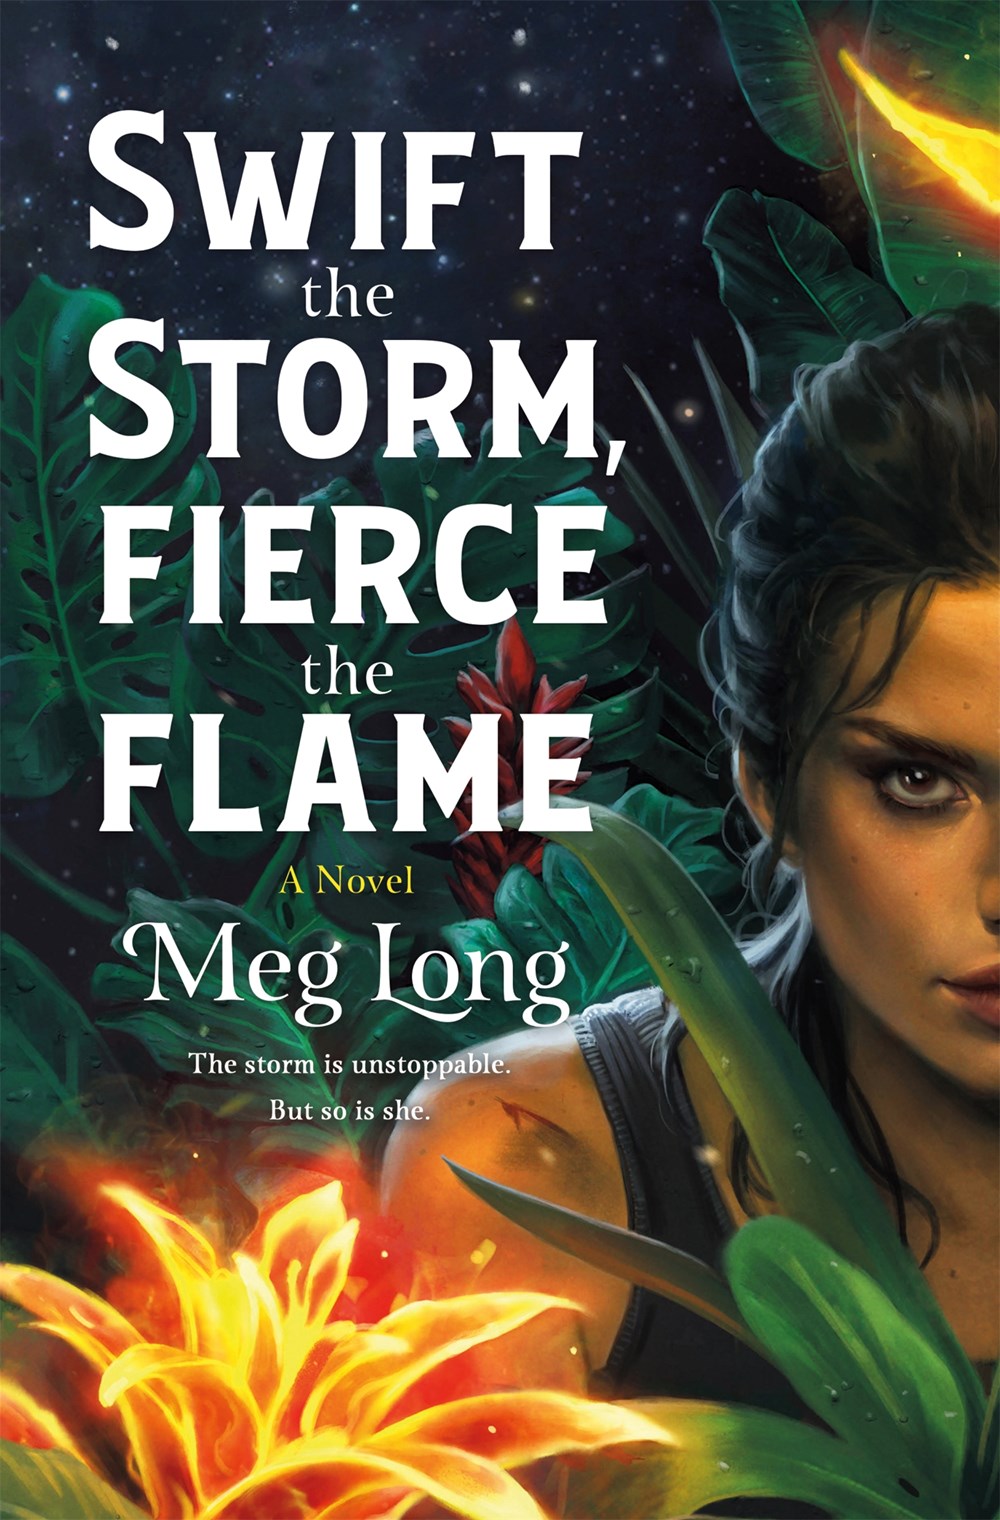 Swift the Storm, Fierce the Flame by Meg Long (Signed Copy)